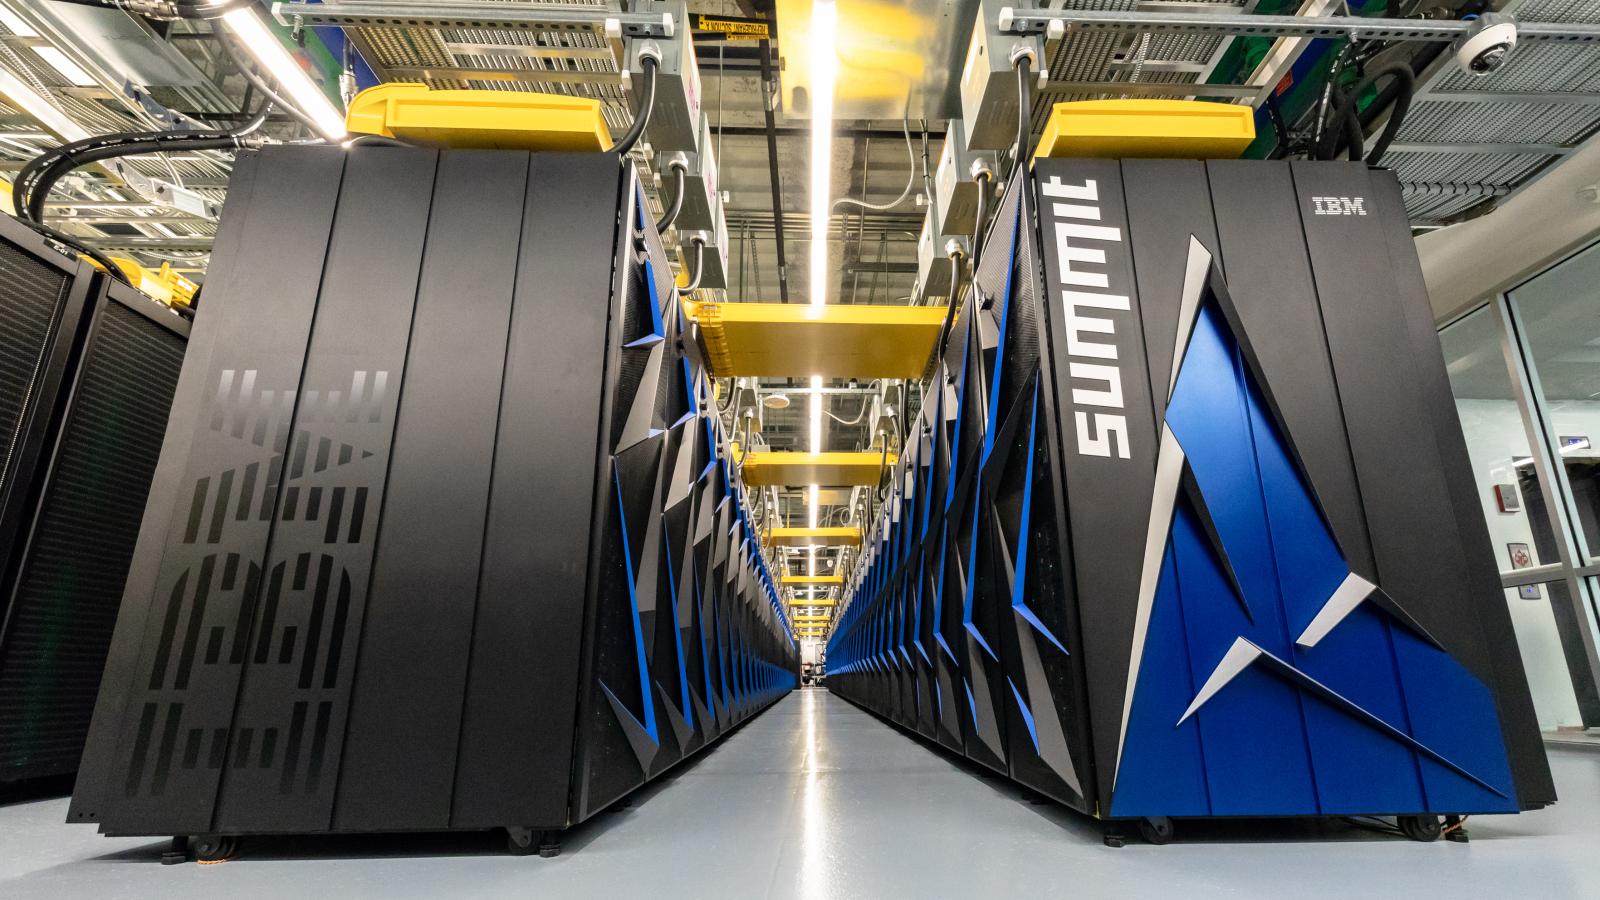 The US has the world's fastest supercomputer again: the 200 petaflop Summit